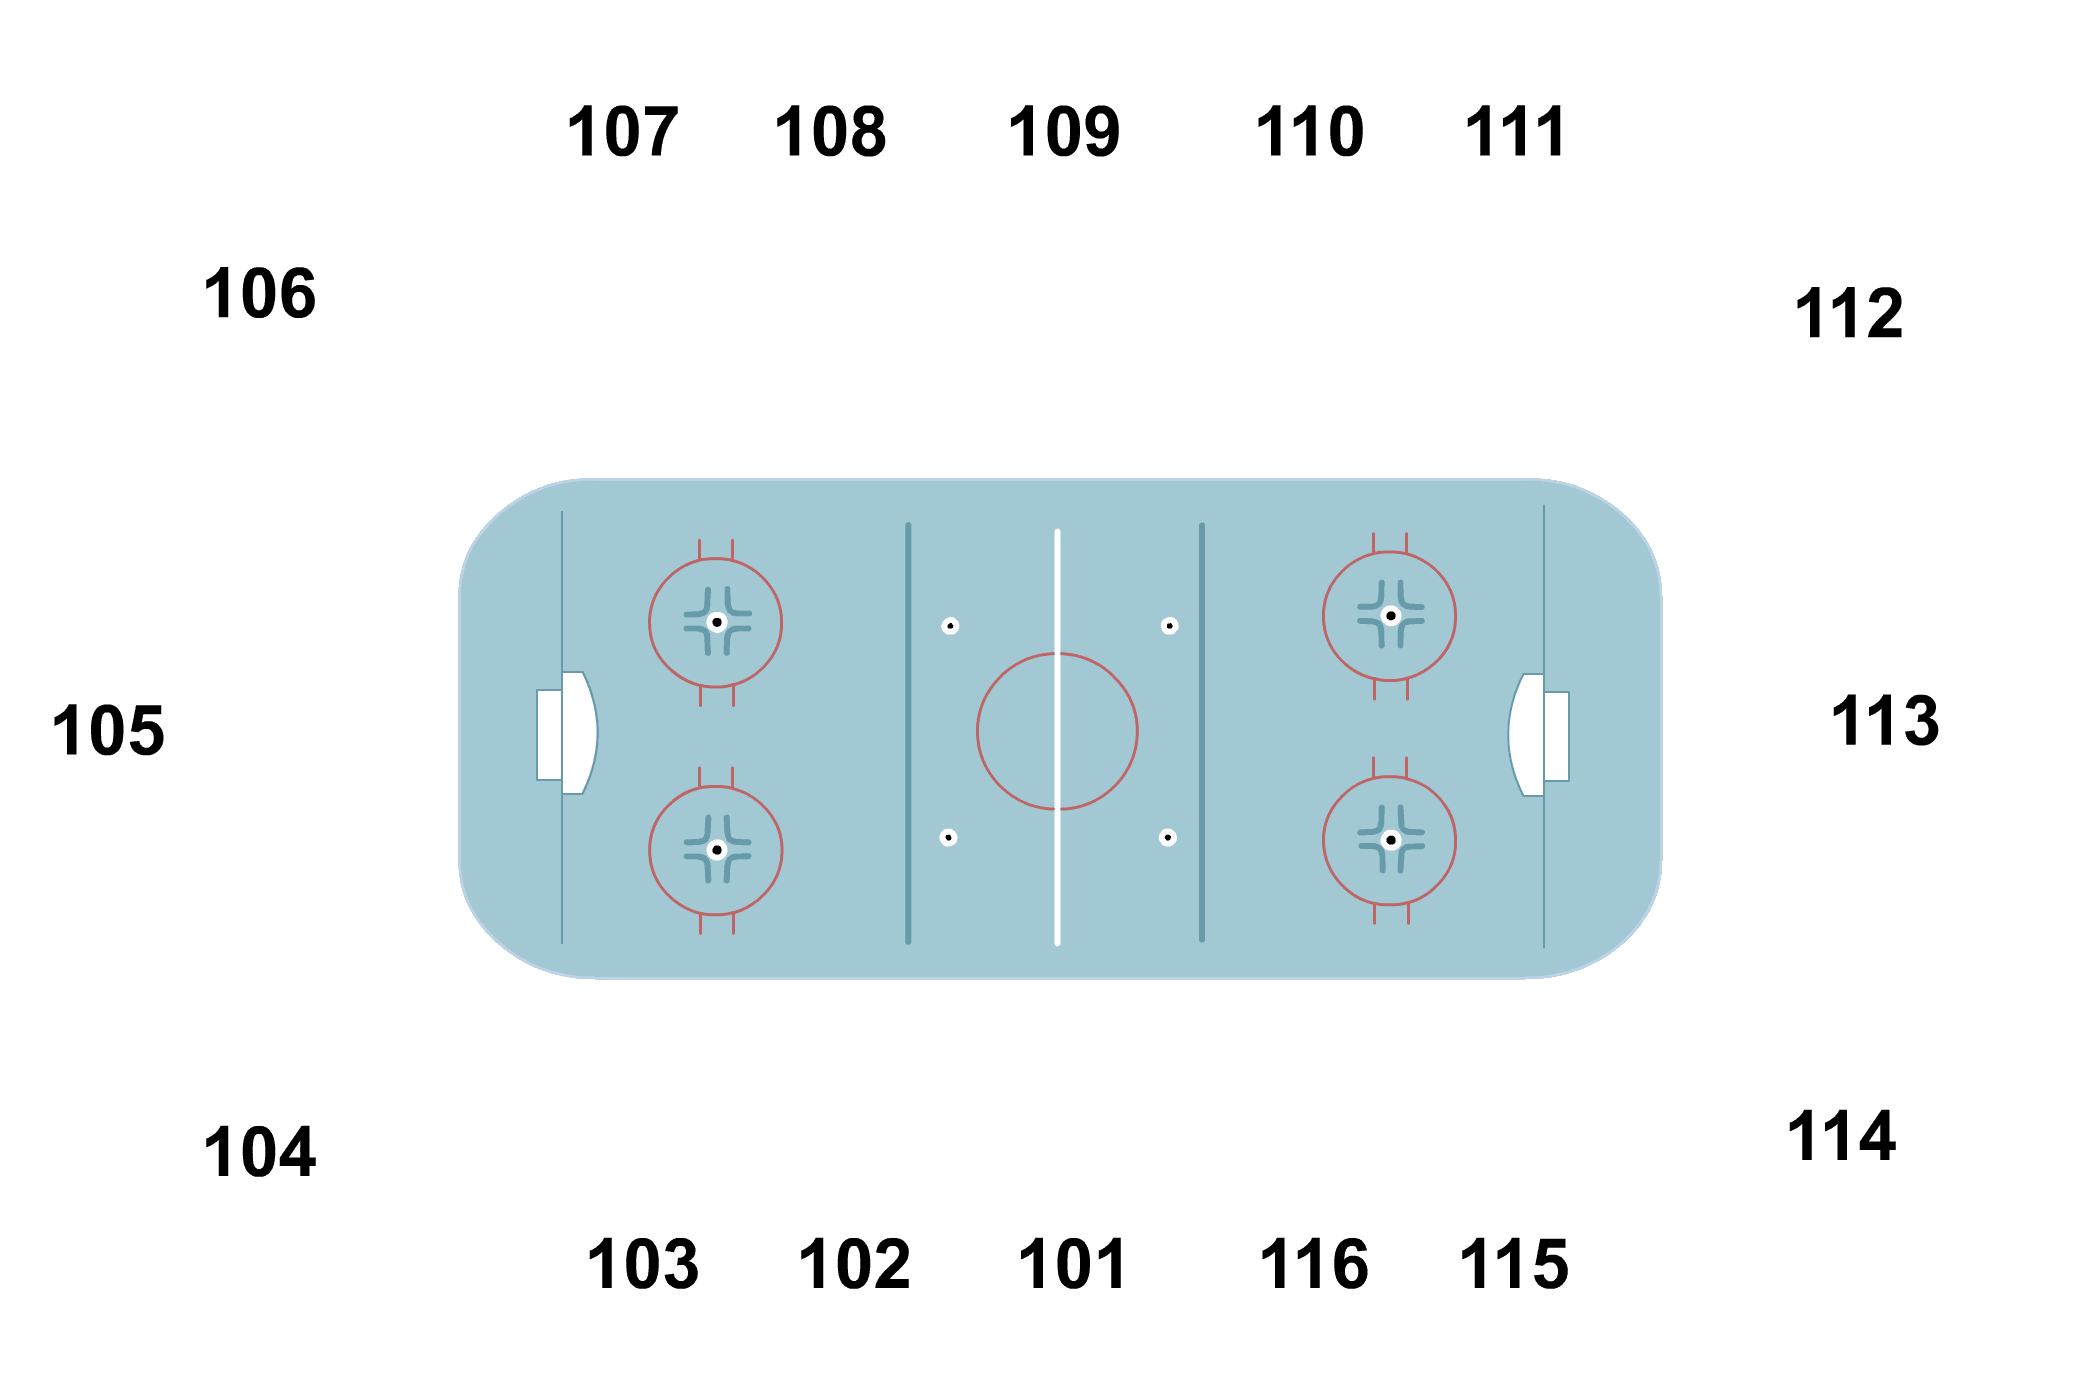 Save On Foods Memorial Centre Victoria Seating Chart